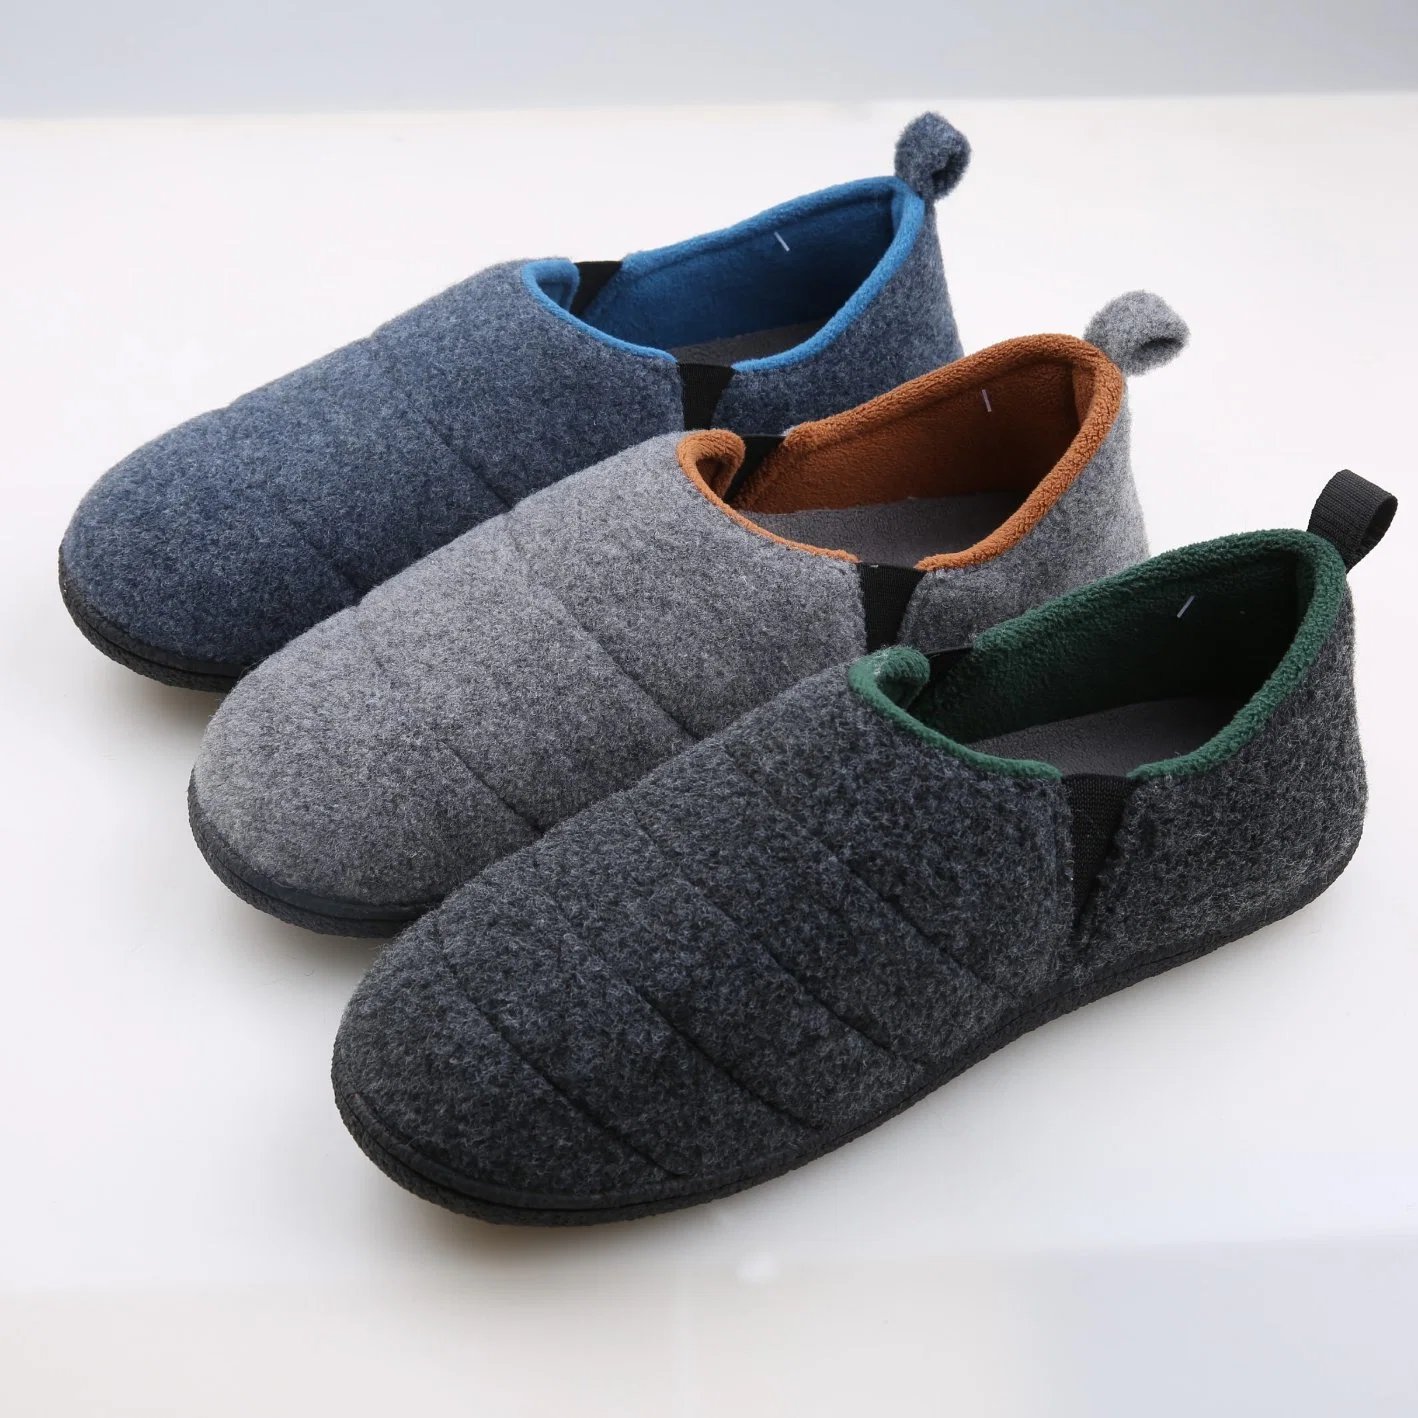 Corifei Men Autumn and Winter Cotton Slippers with Plush Thick Soled Indoor Outdoor Shoes